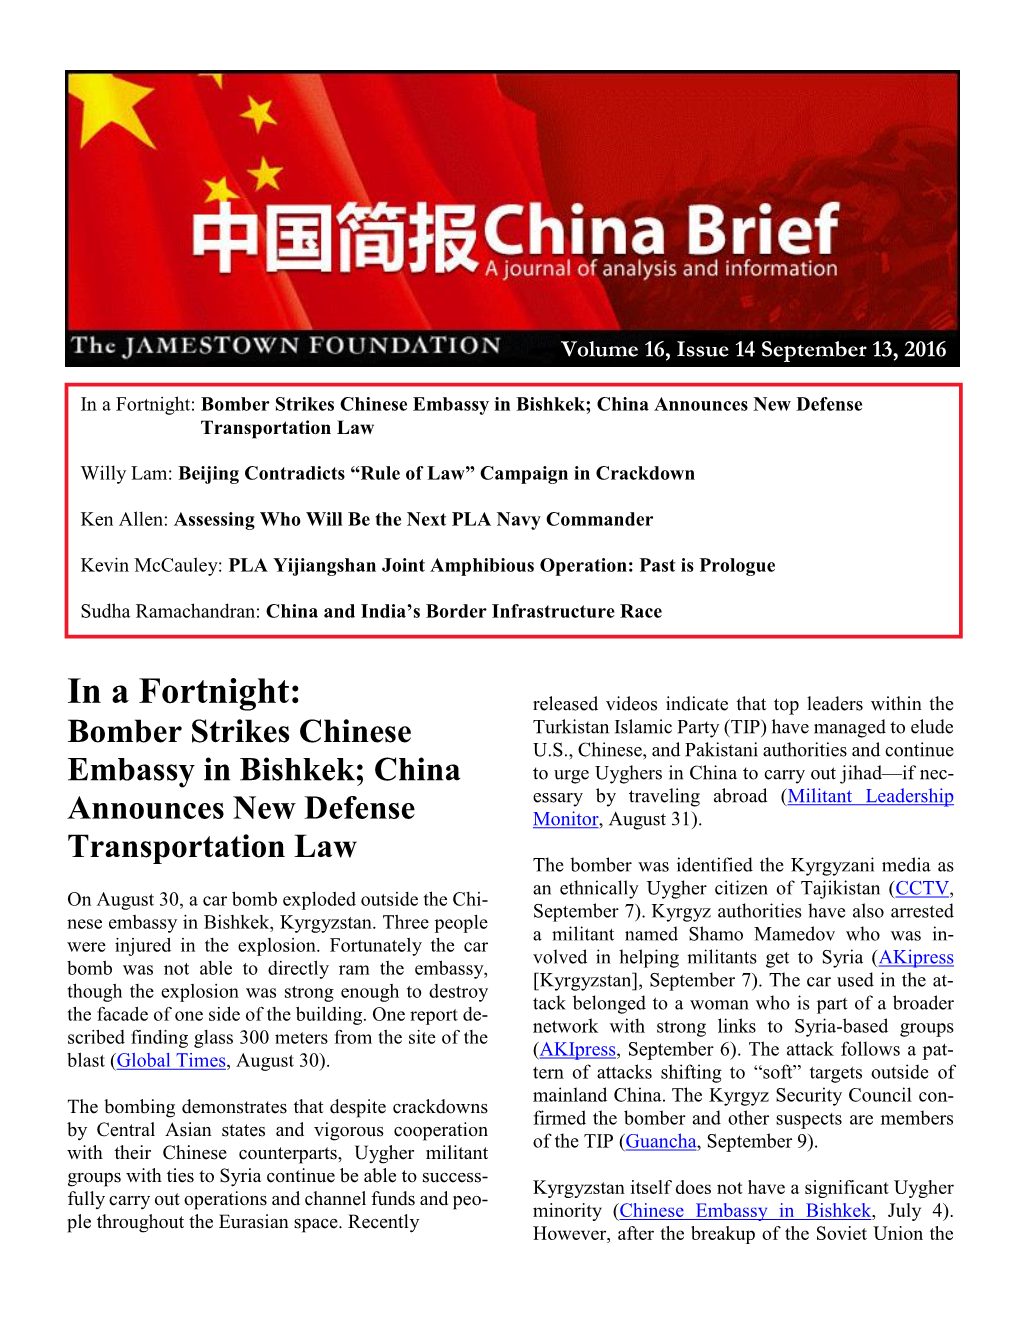 In a Fortnight: Bomber Strikes Chinese Embassy in Bishkek; China Announces New Defense Transportation Law